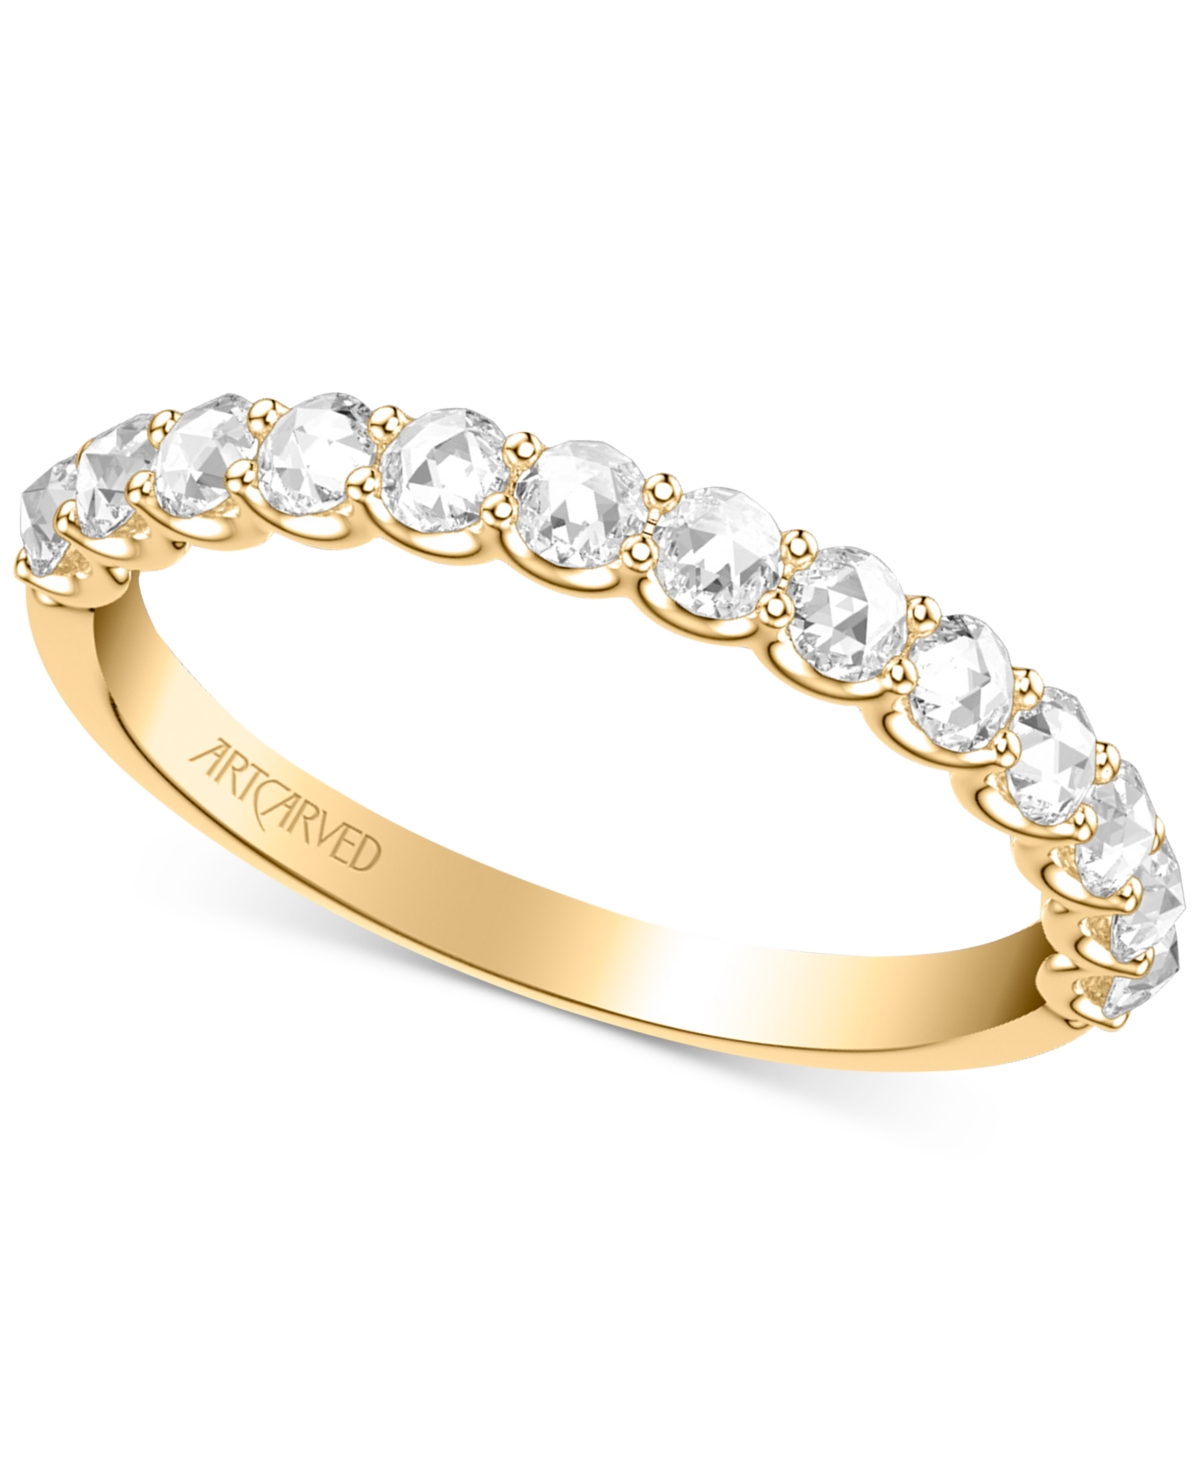 Artcarved Art Carved Diamond Rose-Cut Band (1/2 ct. t.w.) in 14k White, Yellow or Rose Gold